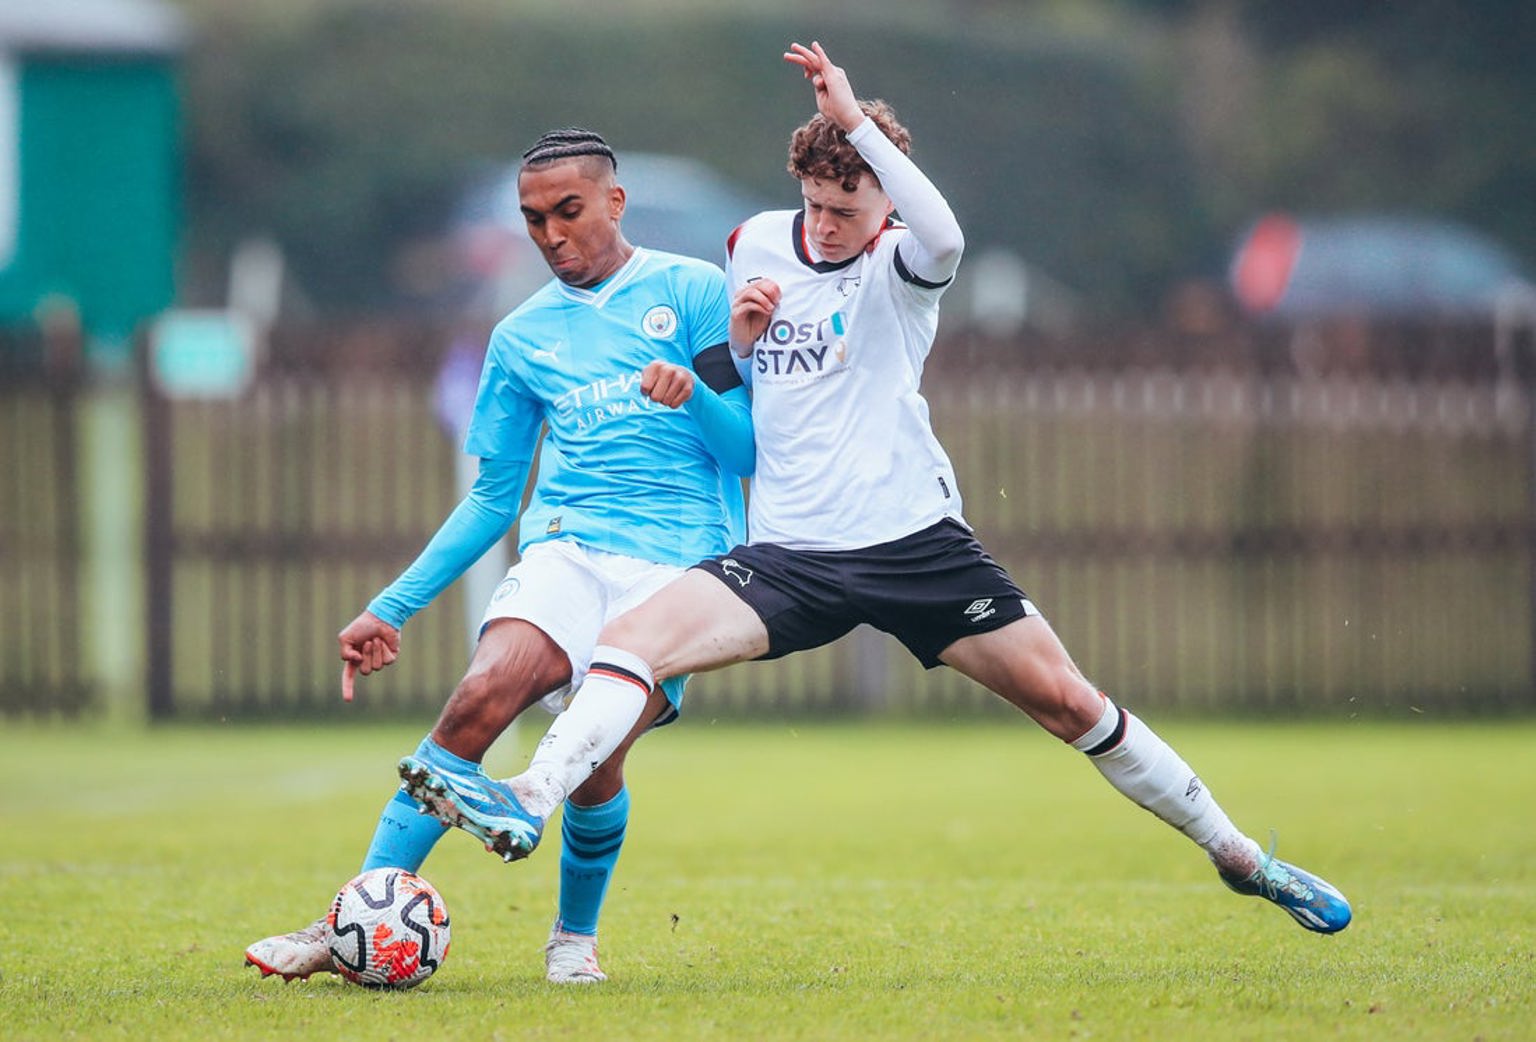 EDS fall to defeat against Derby